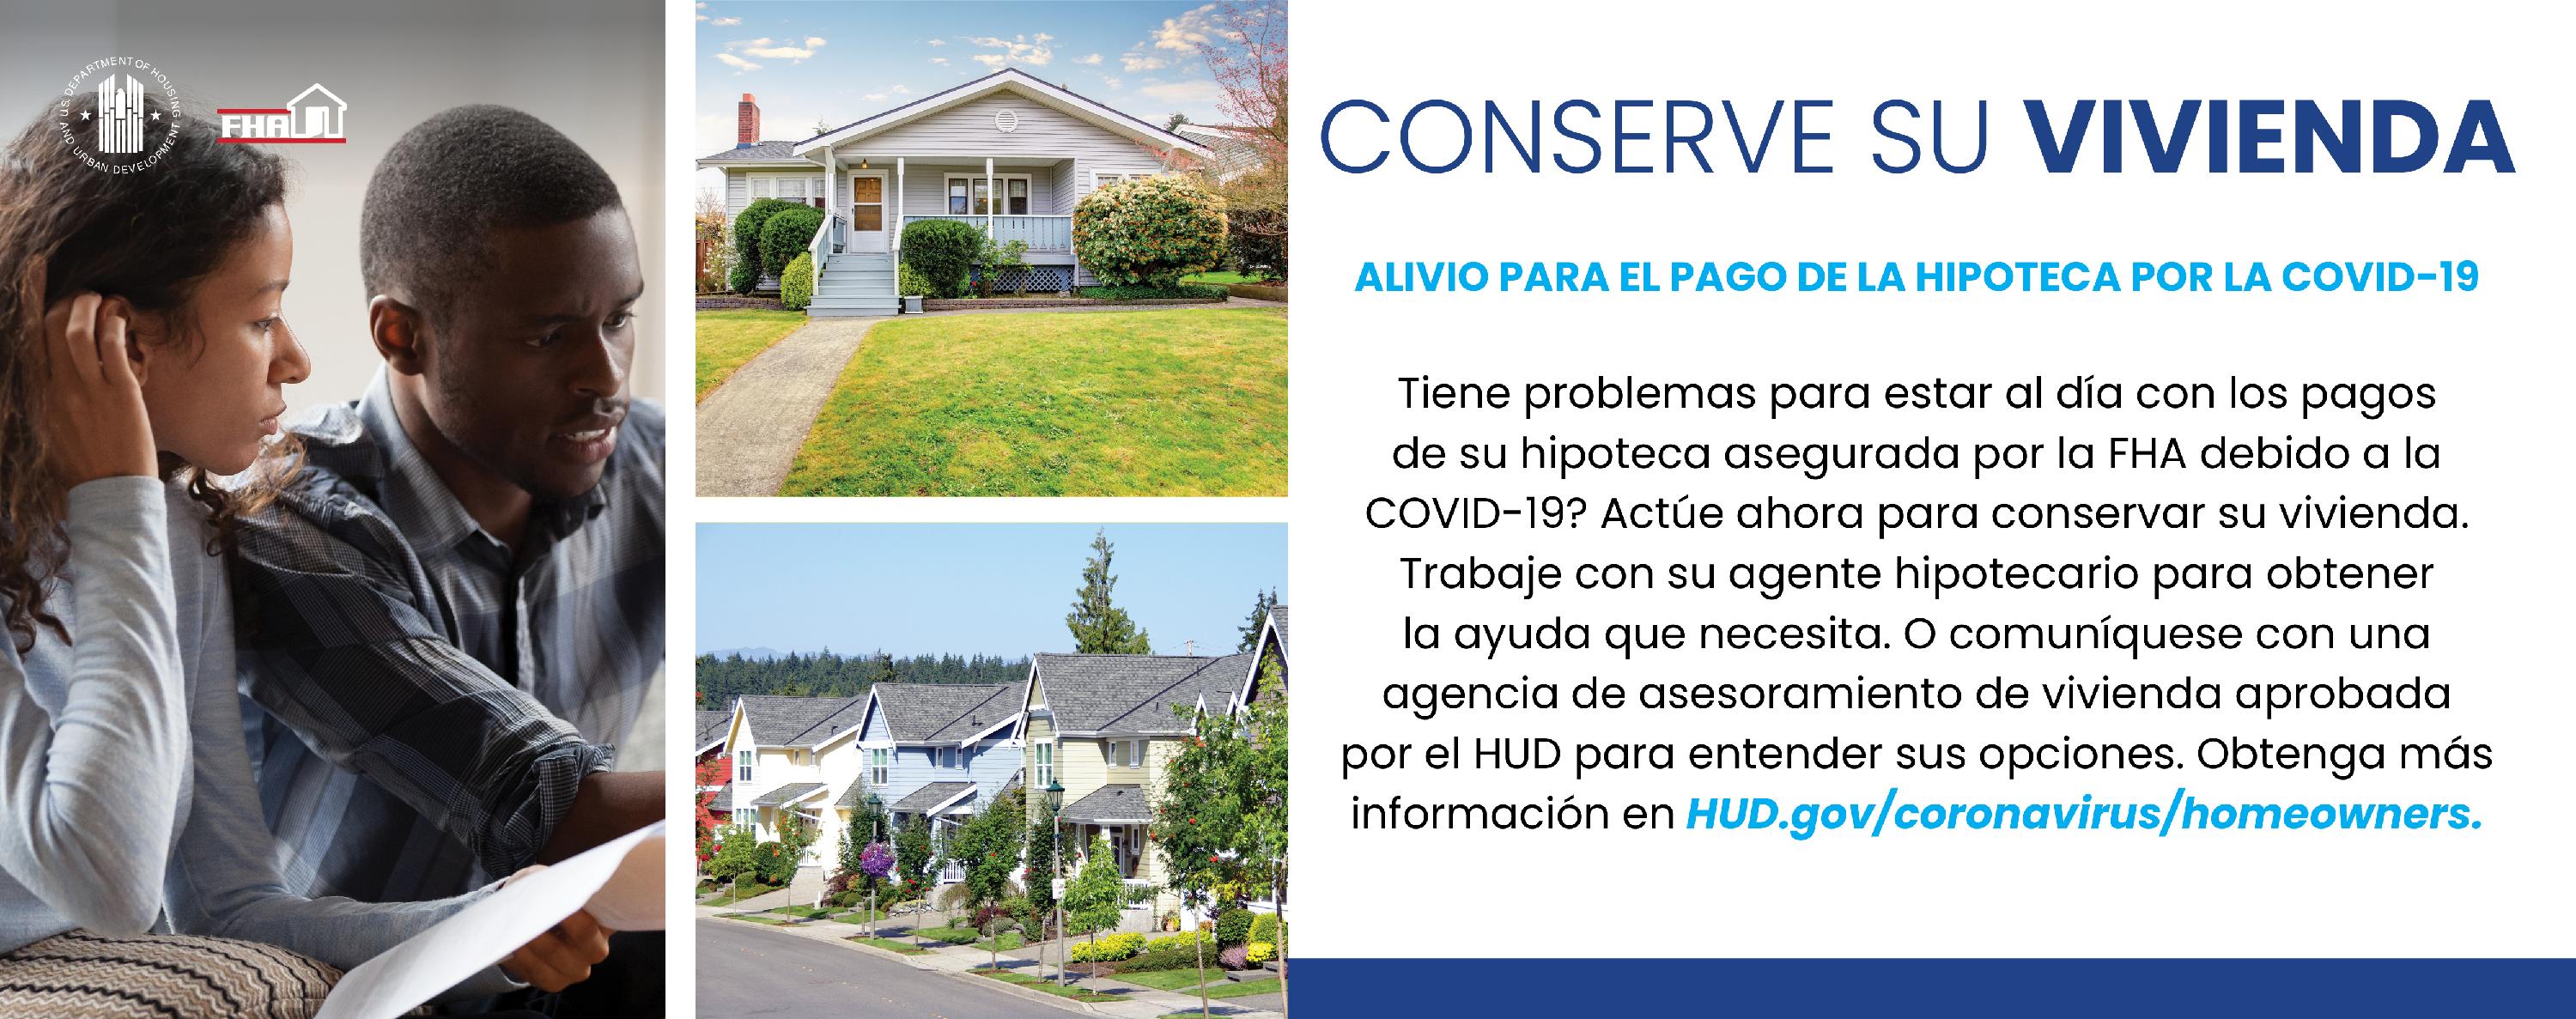 Spanish_Covid-19 Mortgage payment relief banner 1